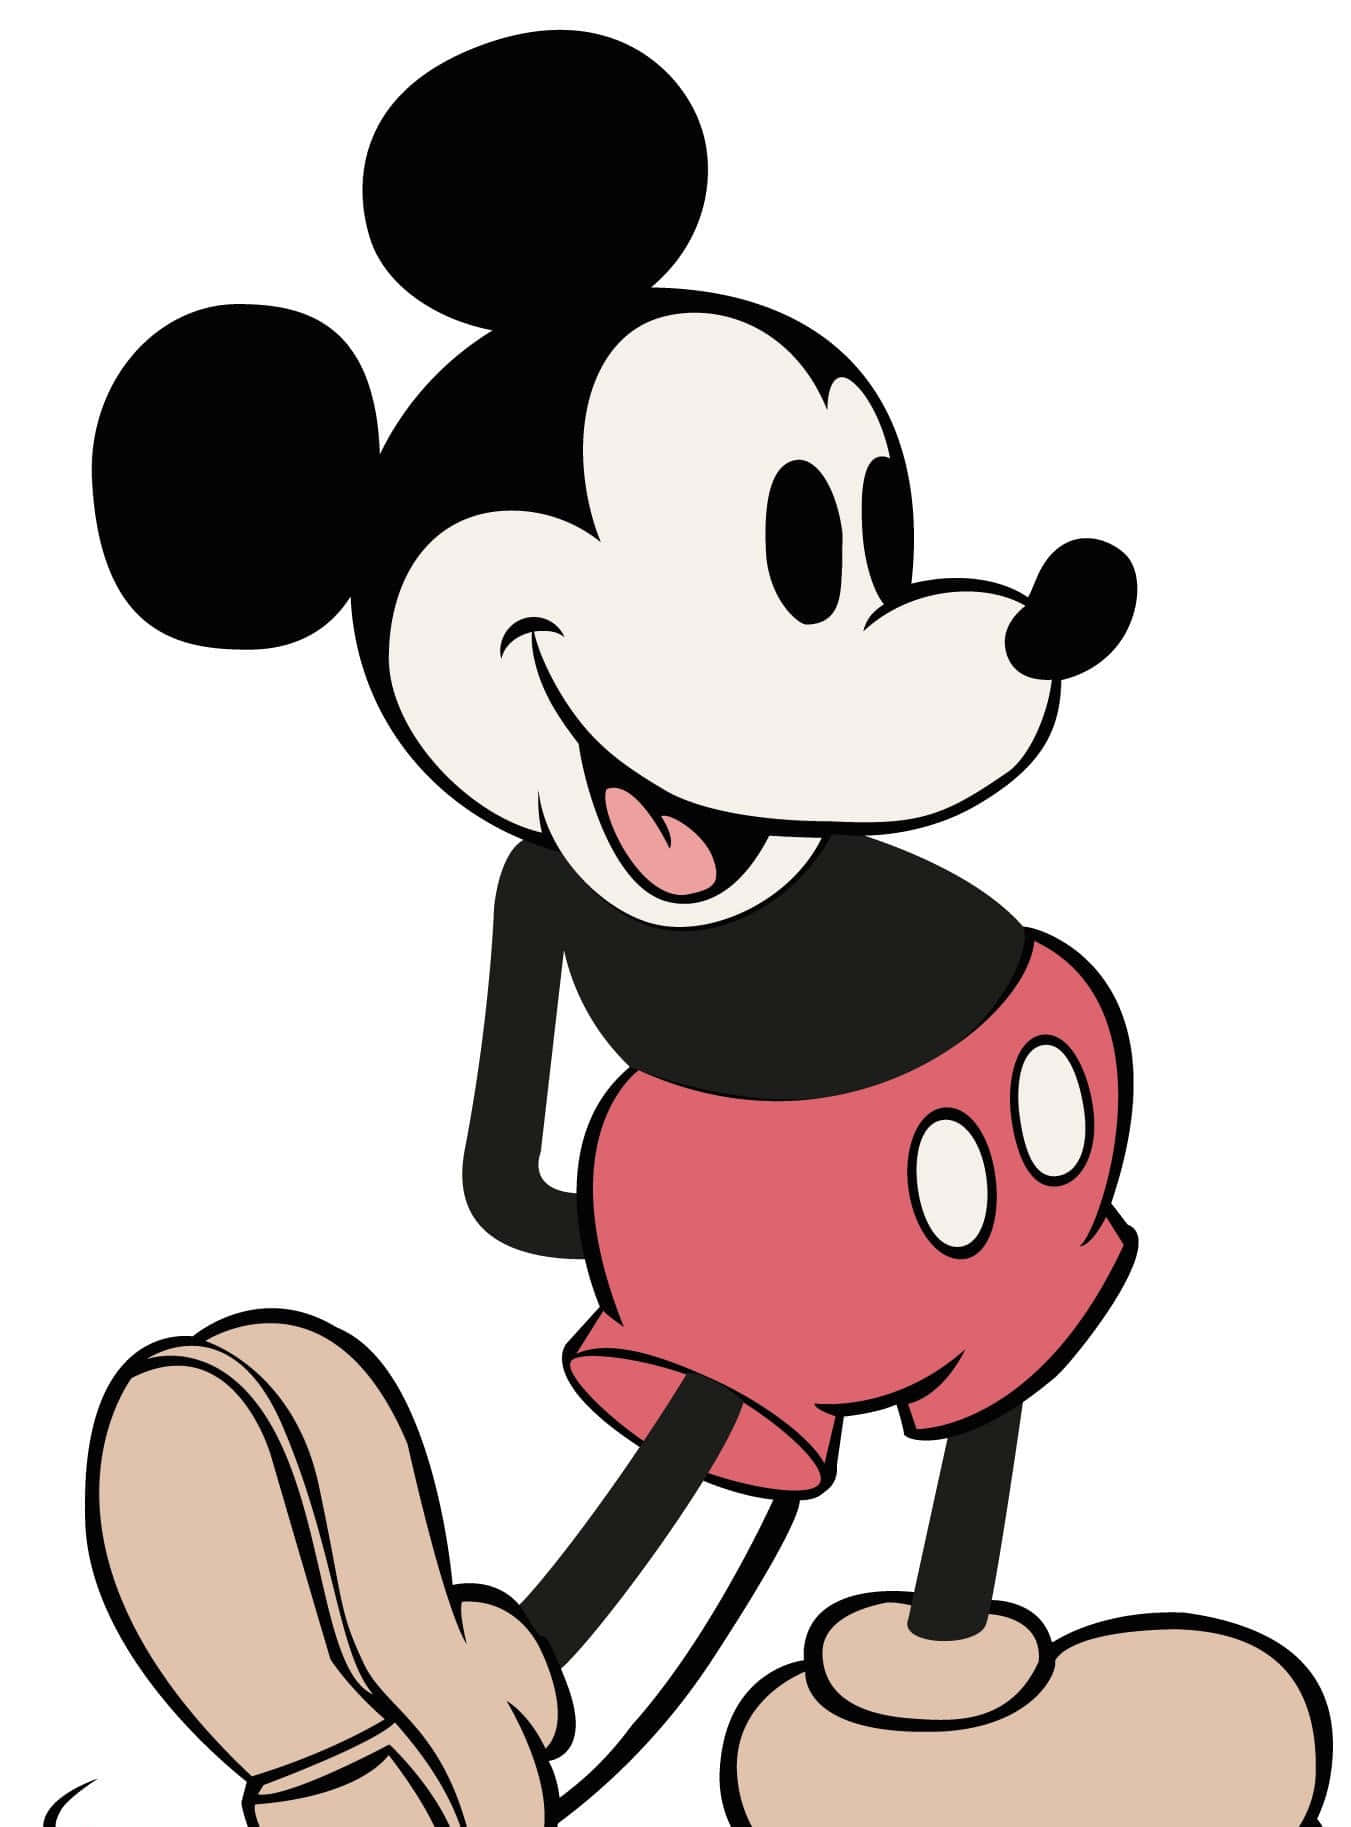 Mickey Mouse, Everyone's Favorite Disney Character!